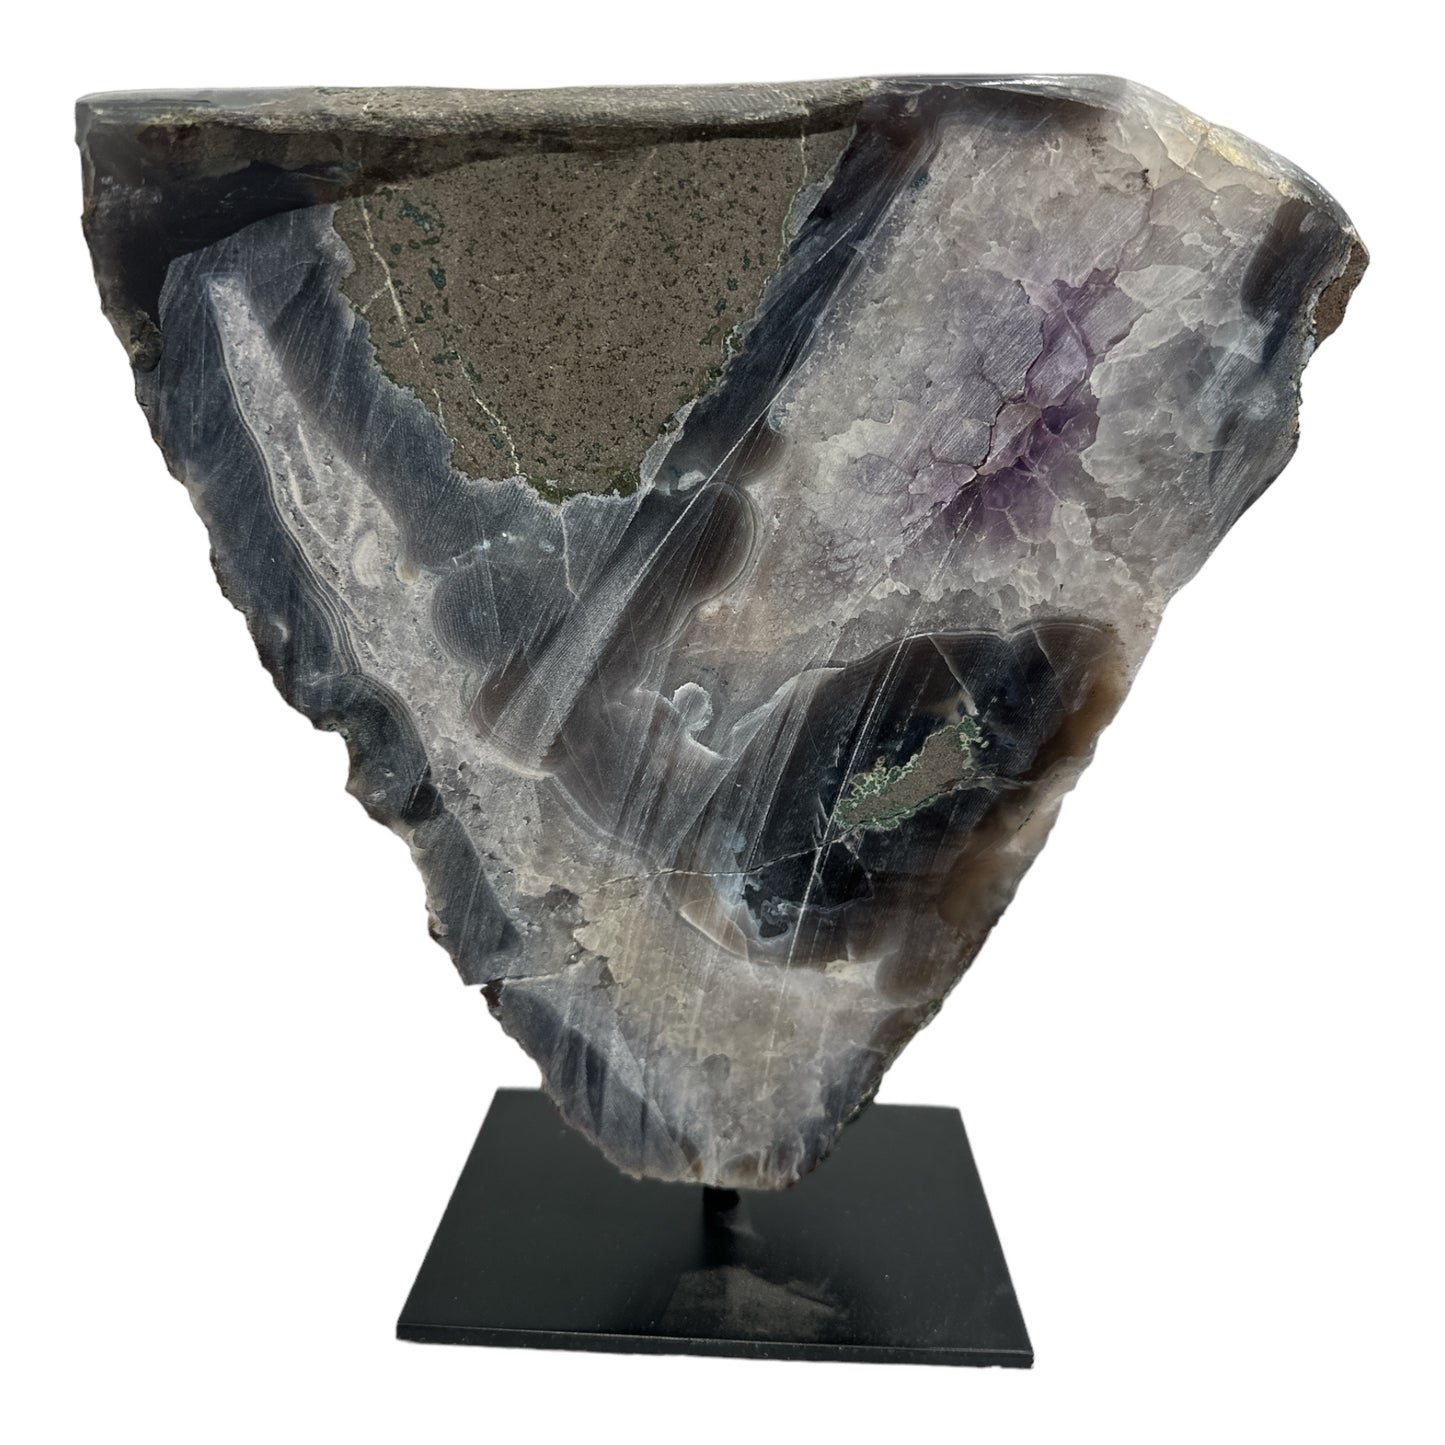 Polished Amethyst Druze on Stand